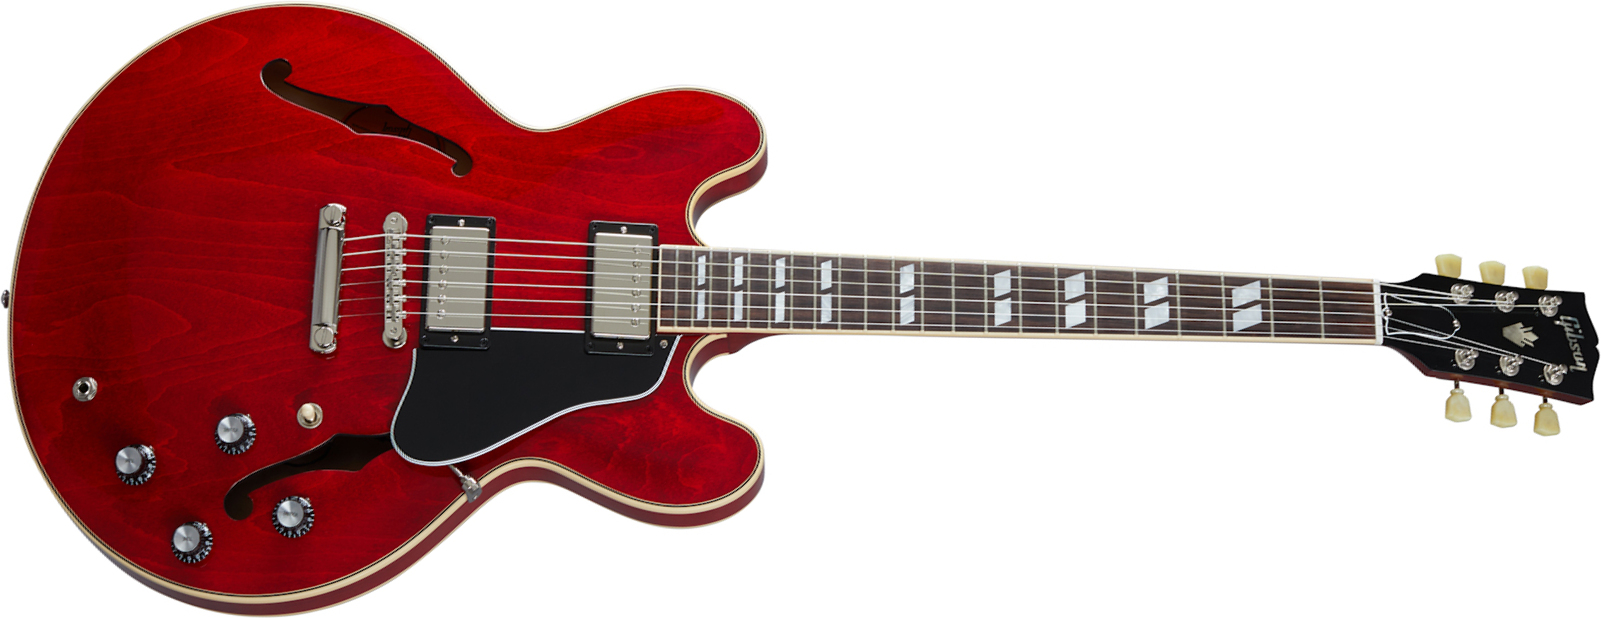 Gibson Es-345 Original 2020 2h Ht Rw - Sixties Cherry - Semi-hollow electric guitar - Main picture